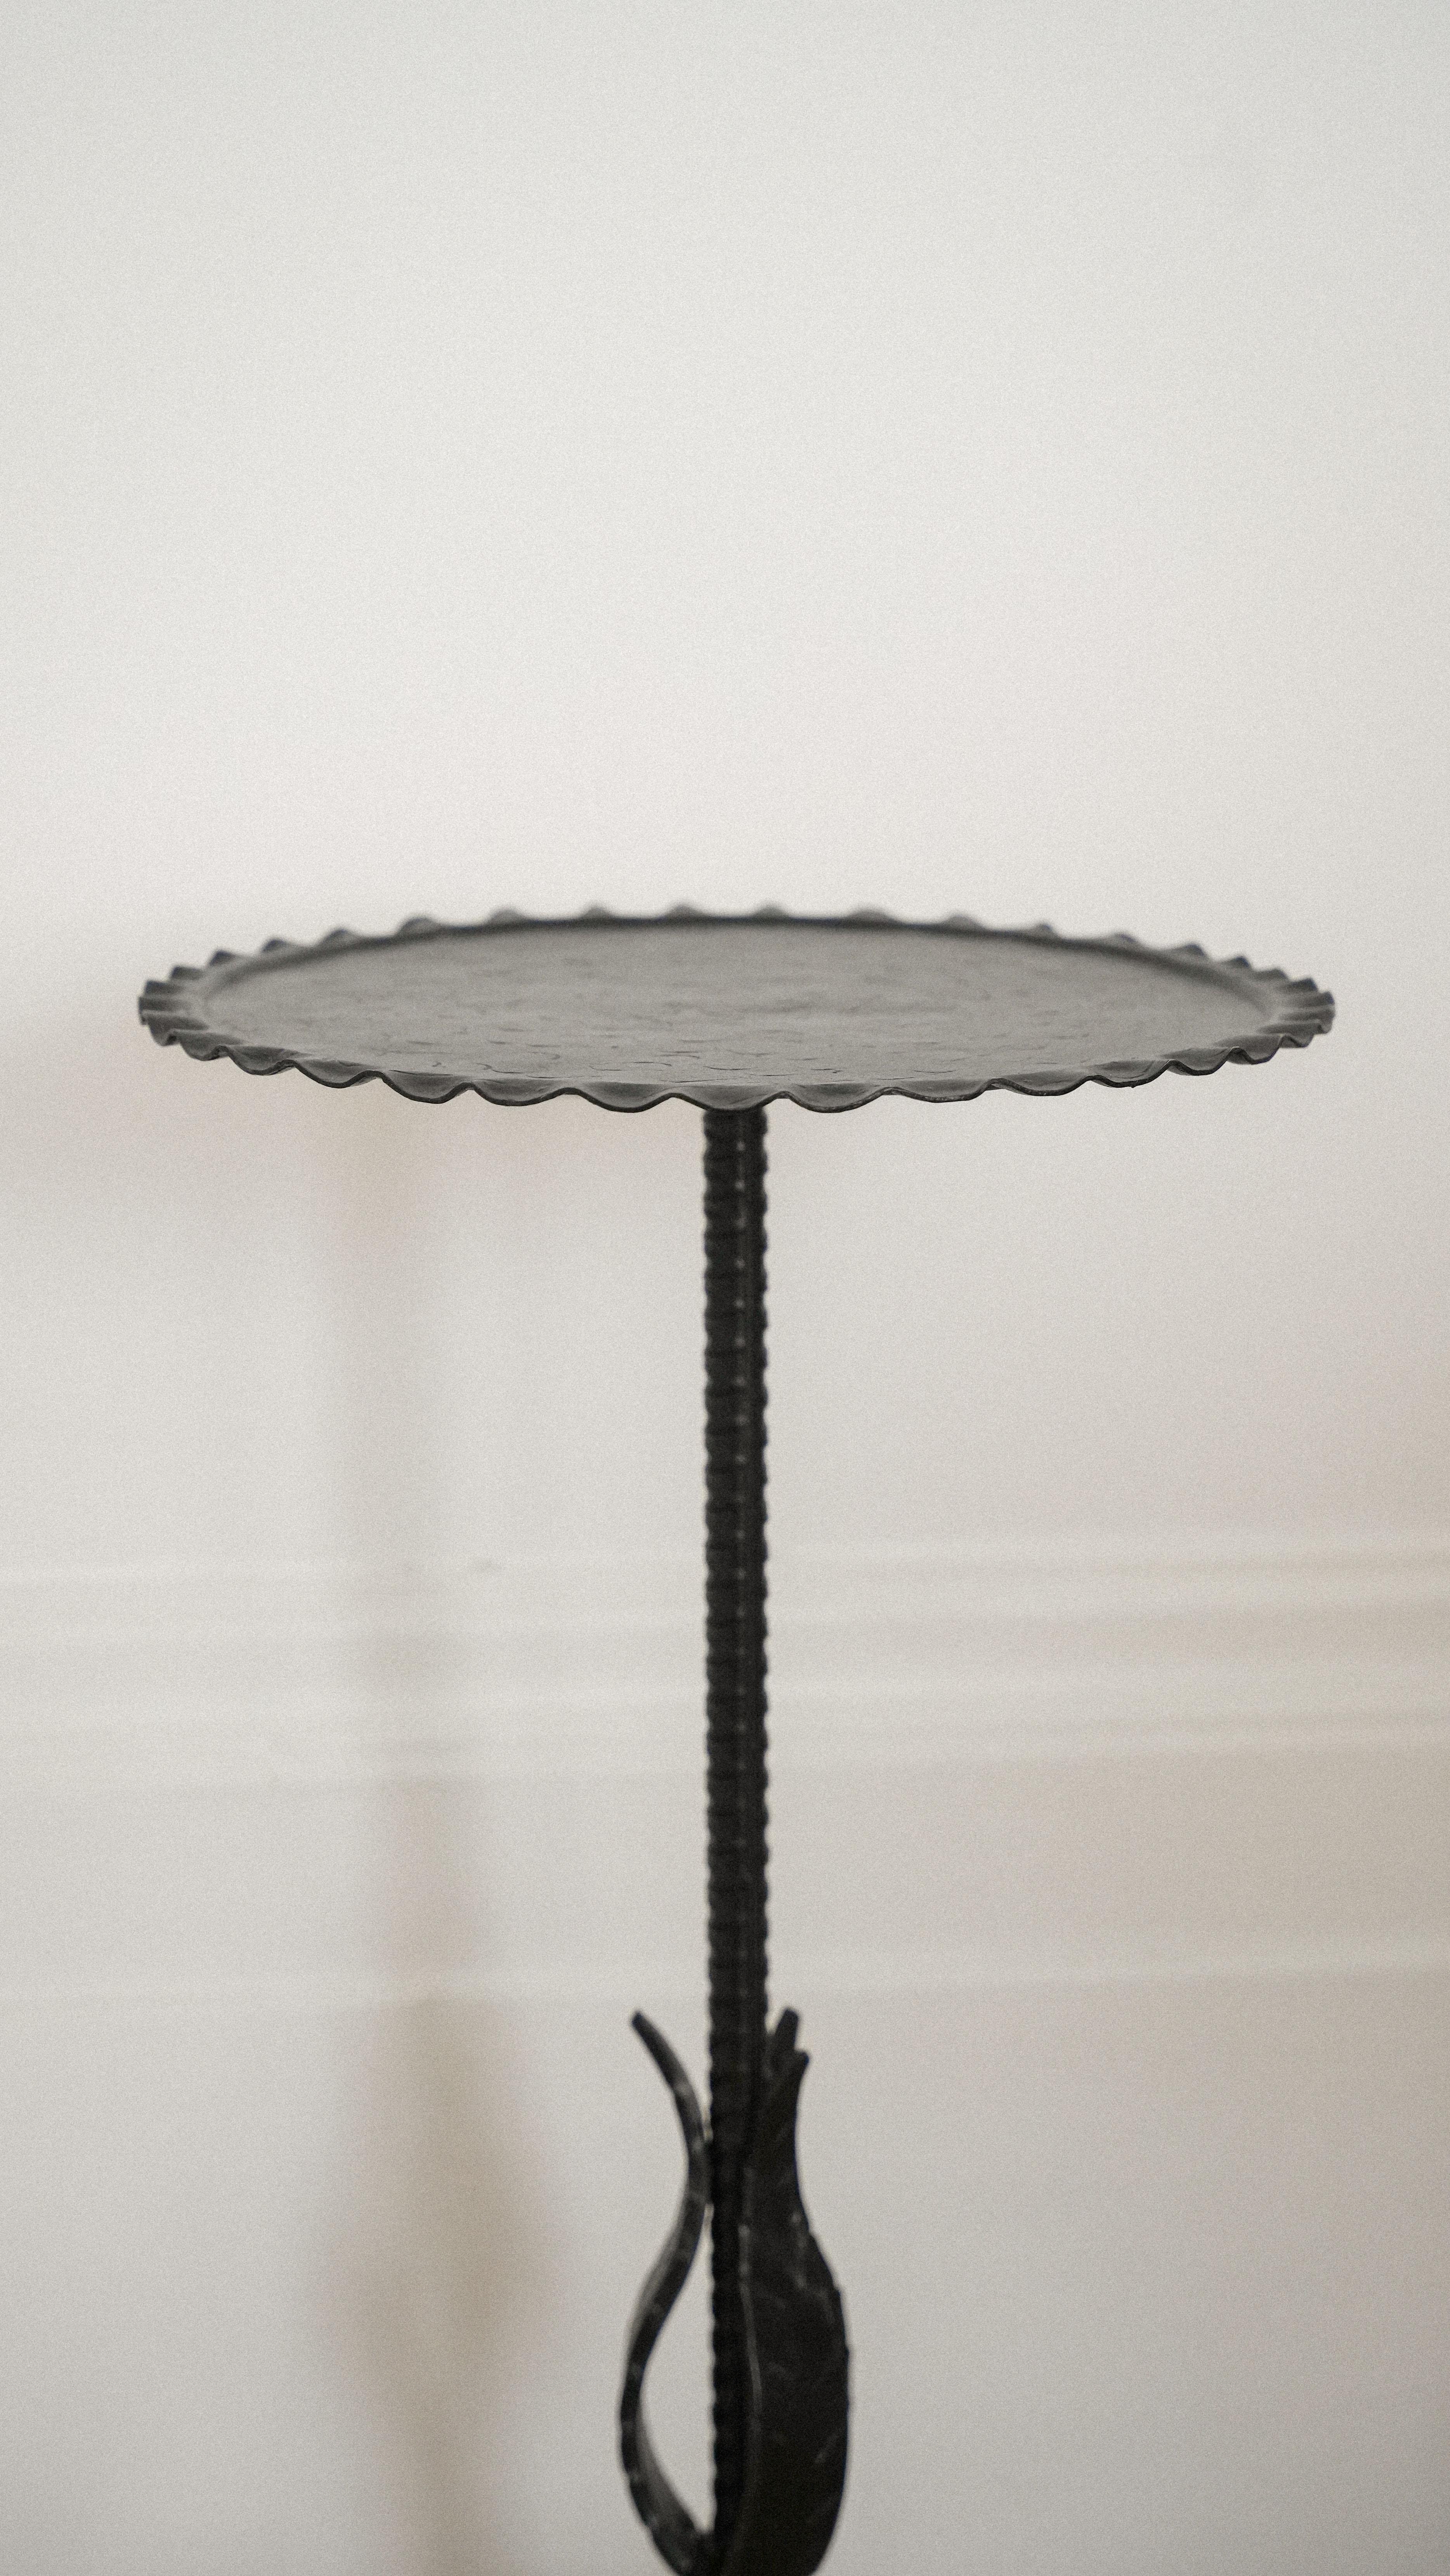 An attractive iron martini table with acanthus leaf detail on the stem, a lightly scalloped top and etching
to the surface. 

The top is rimmed with a ‘piecrust’ edge, and there is a gentle wave etching to the surface. The original gilt surface had